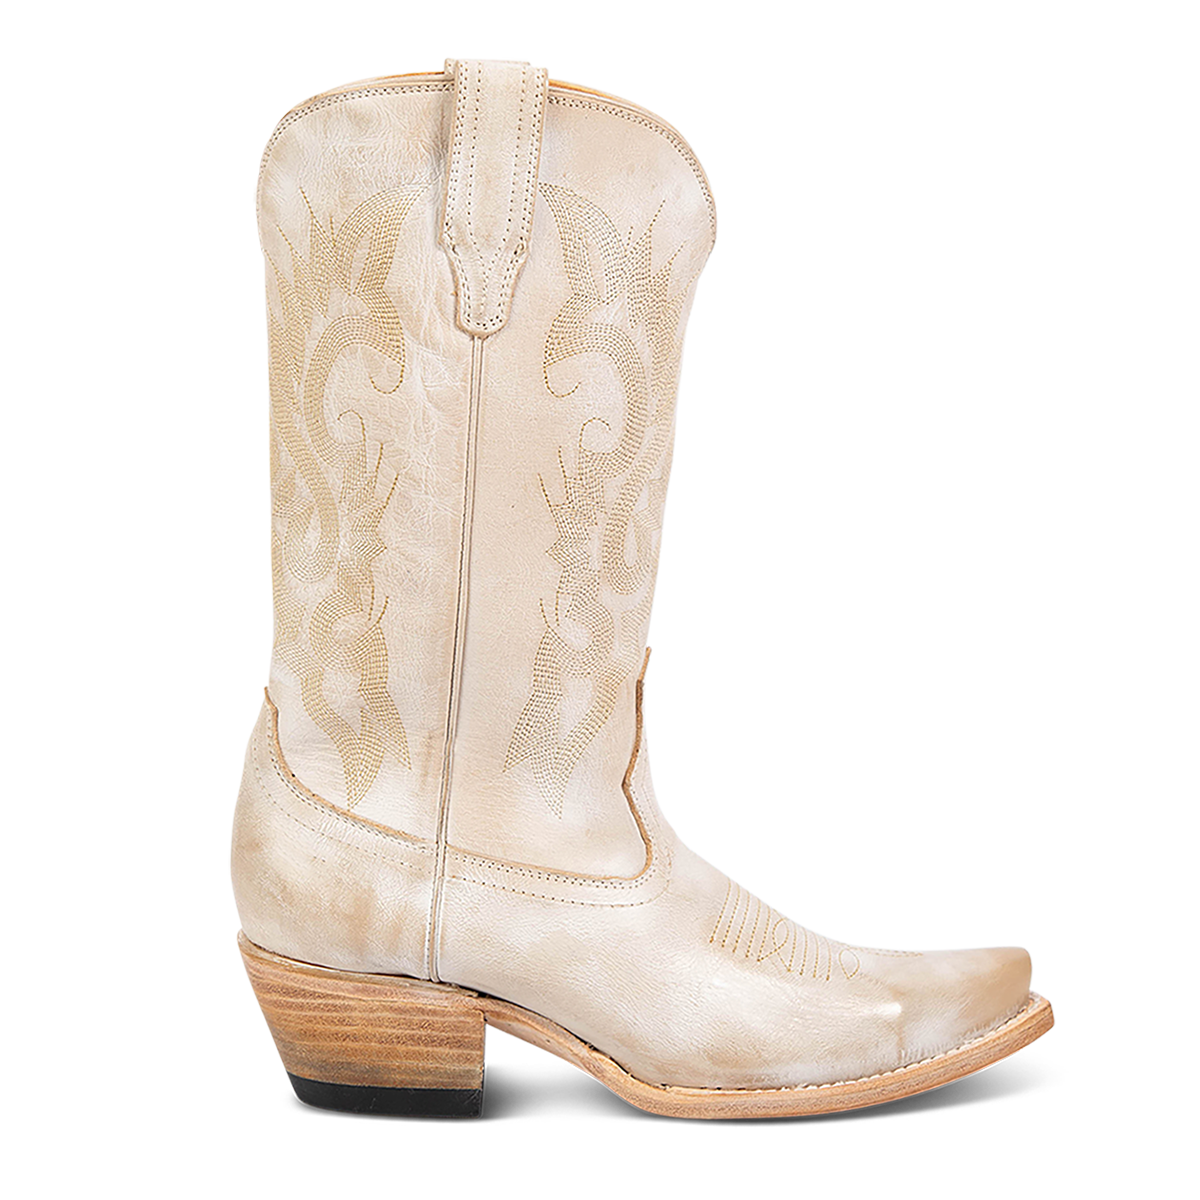 FREEBIRD women's Woody beige leather boot with stitch detailing and snip toe construction